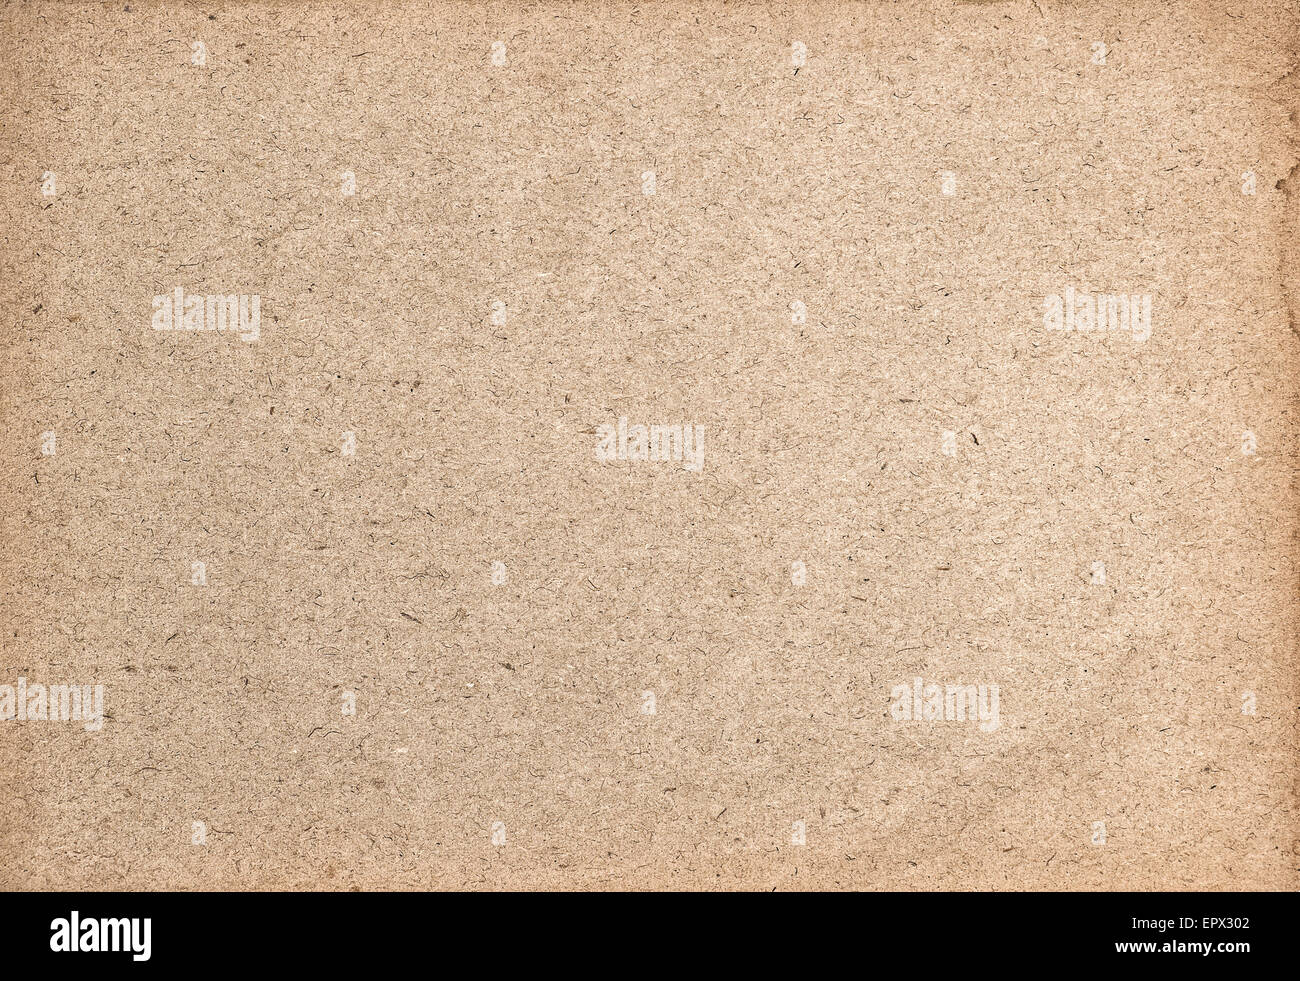 grungy paper texture. used cardboard background Stock Photo